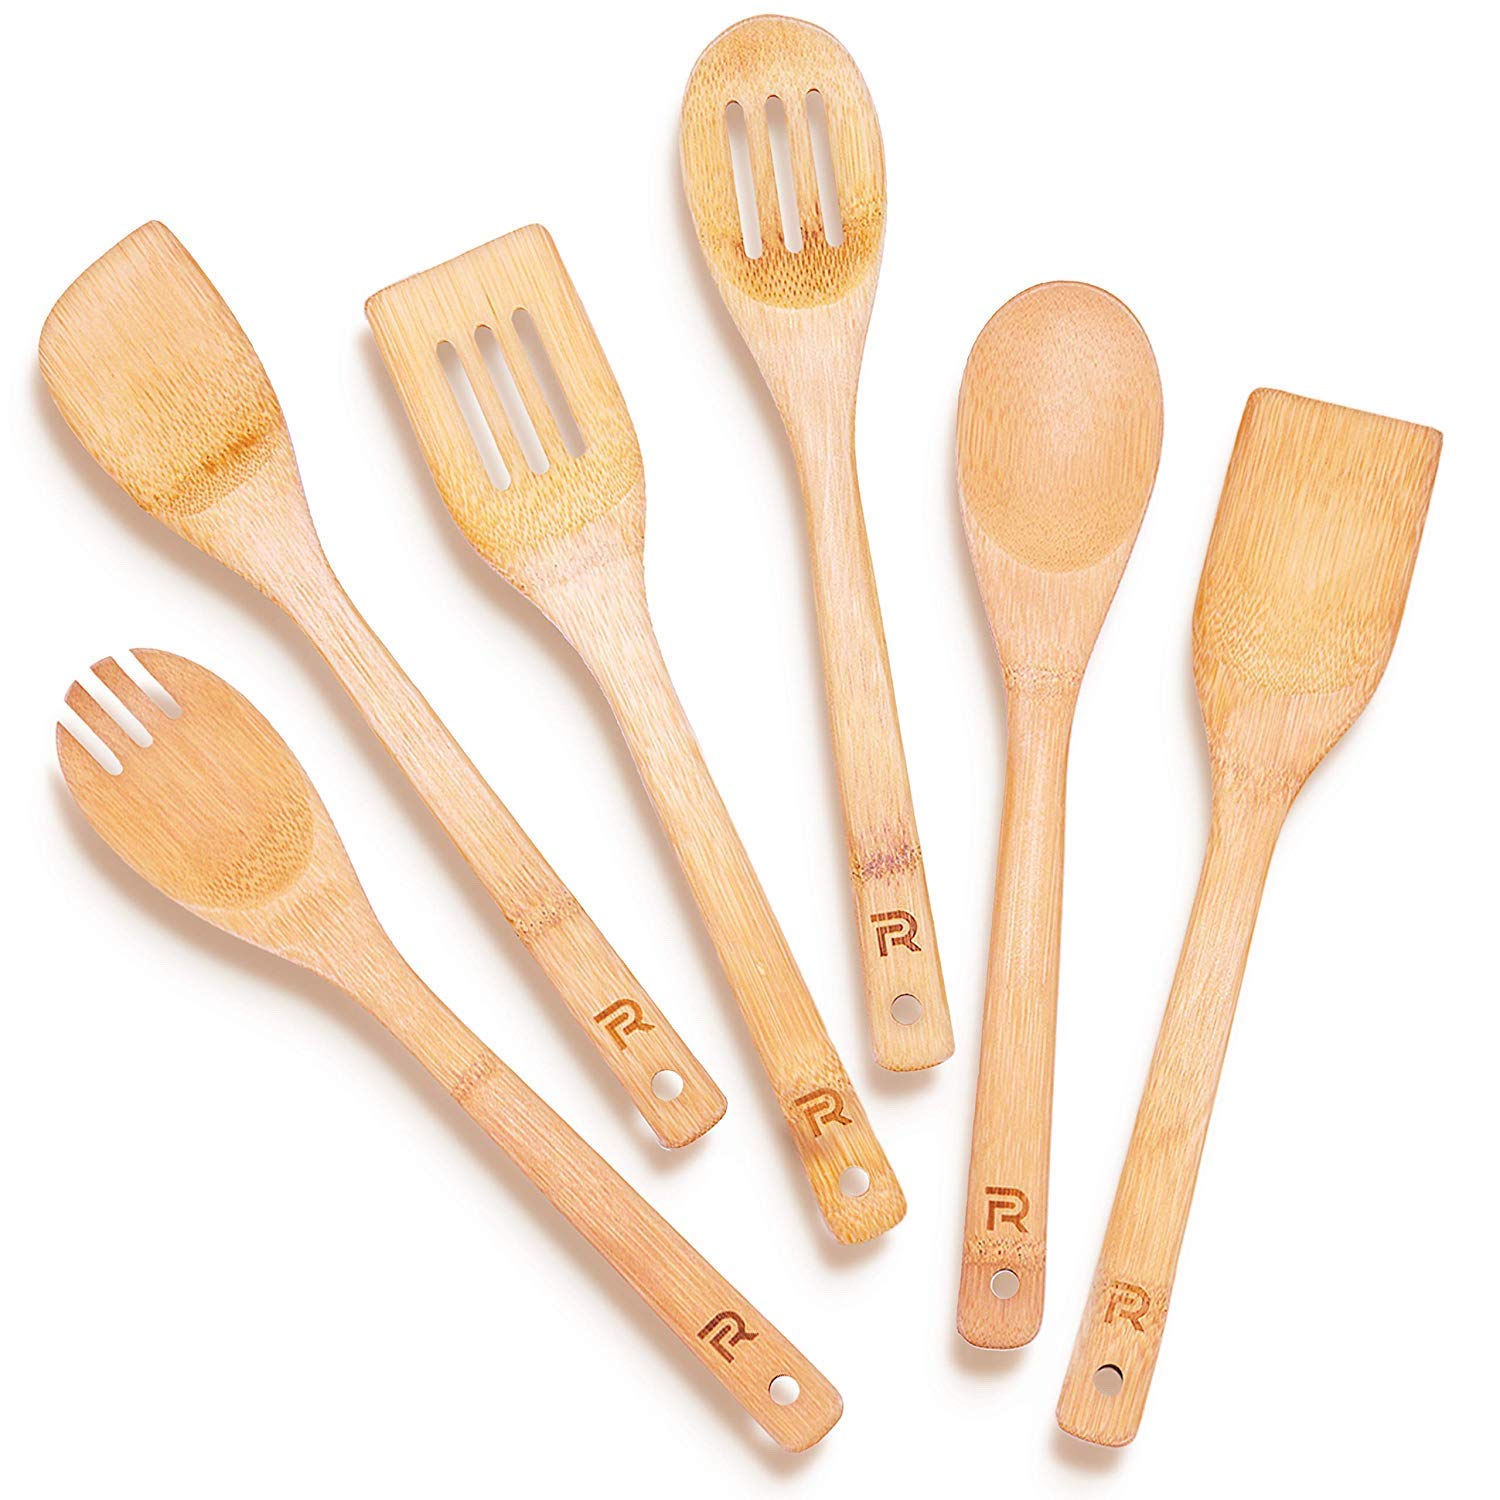 Riveira Bamboo Wooden Spoons for Cooking 6-Piece